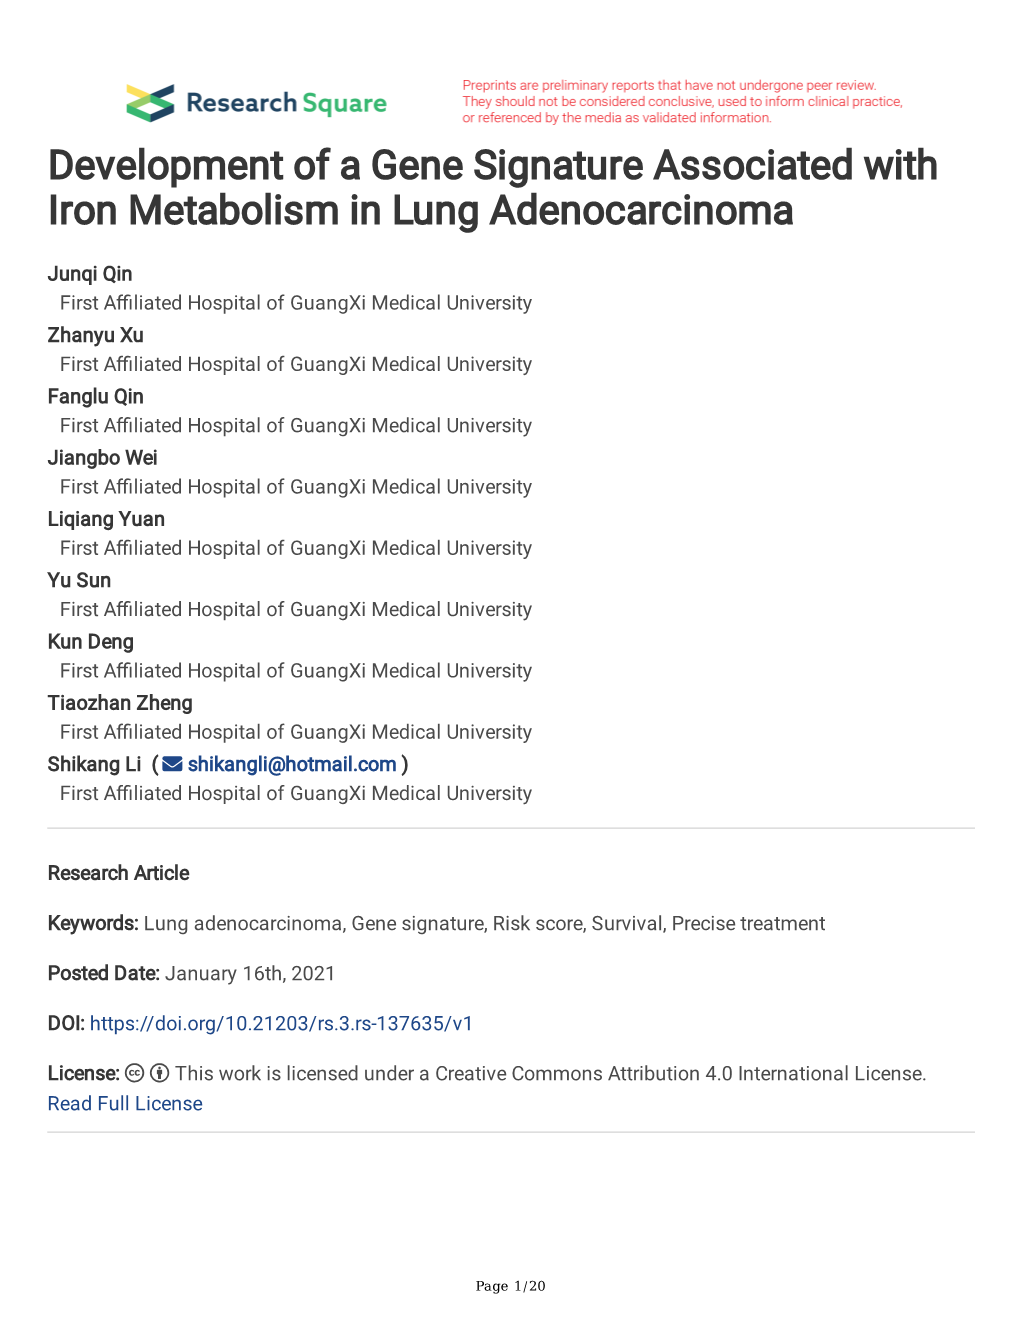 Development of a Gene Signature Associated with Iron Metabolism in Lung Adenocarcinoma